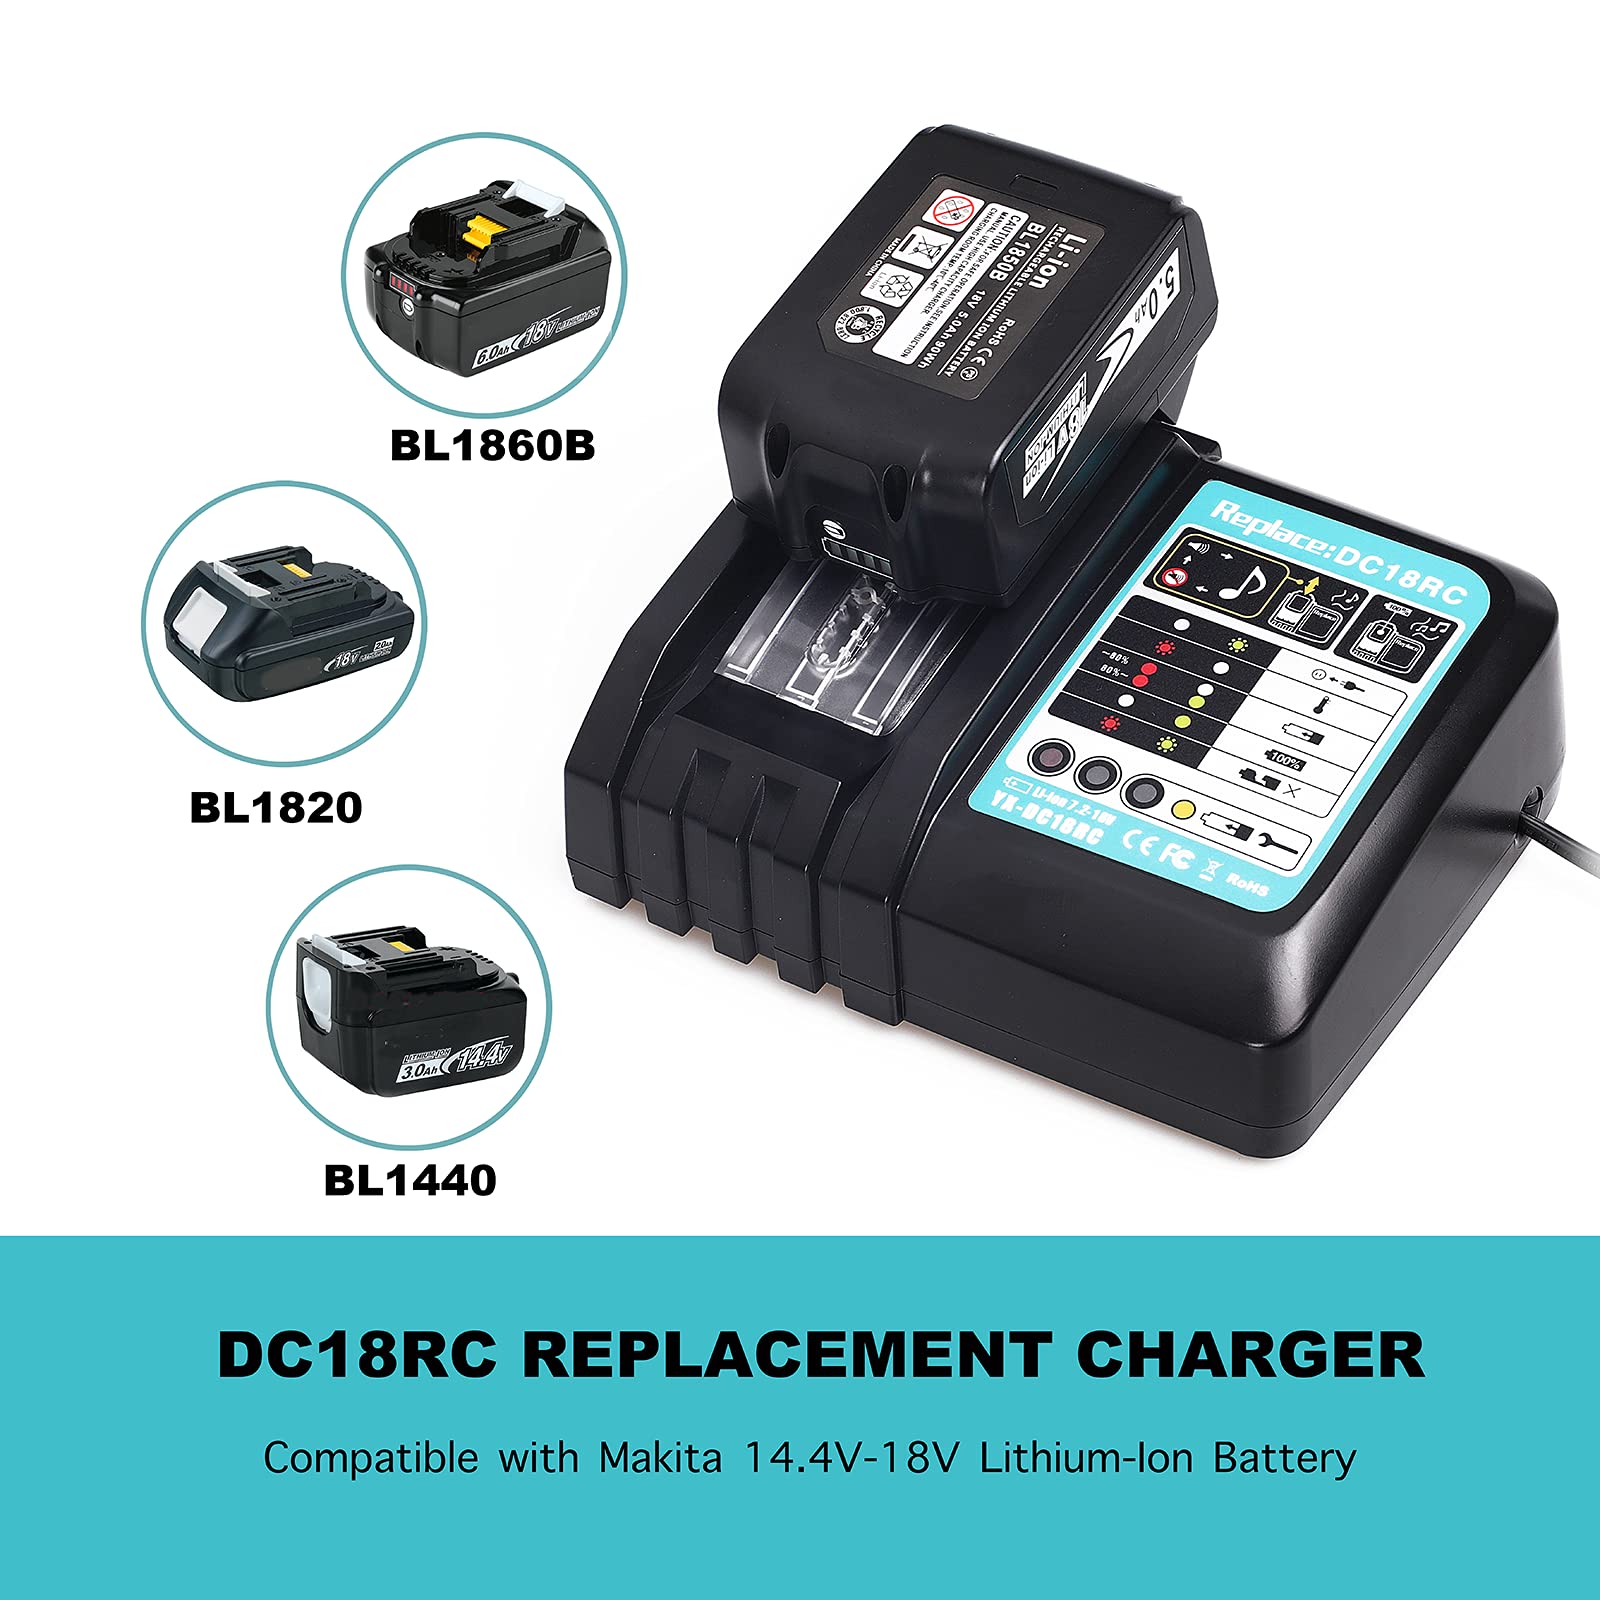 Lilocaja DC18RC 18V 3.0A Rapid Battery Charger for All Makita 14.4V-18V LXT Lithium-Ion Battery BL1860 BL1850 BL1840 BL1830 BL1450 BL1440 BL1430, Replaces for Makita Charger DC18RD DC18RA DC18SF